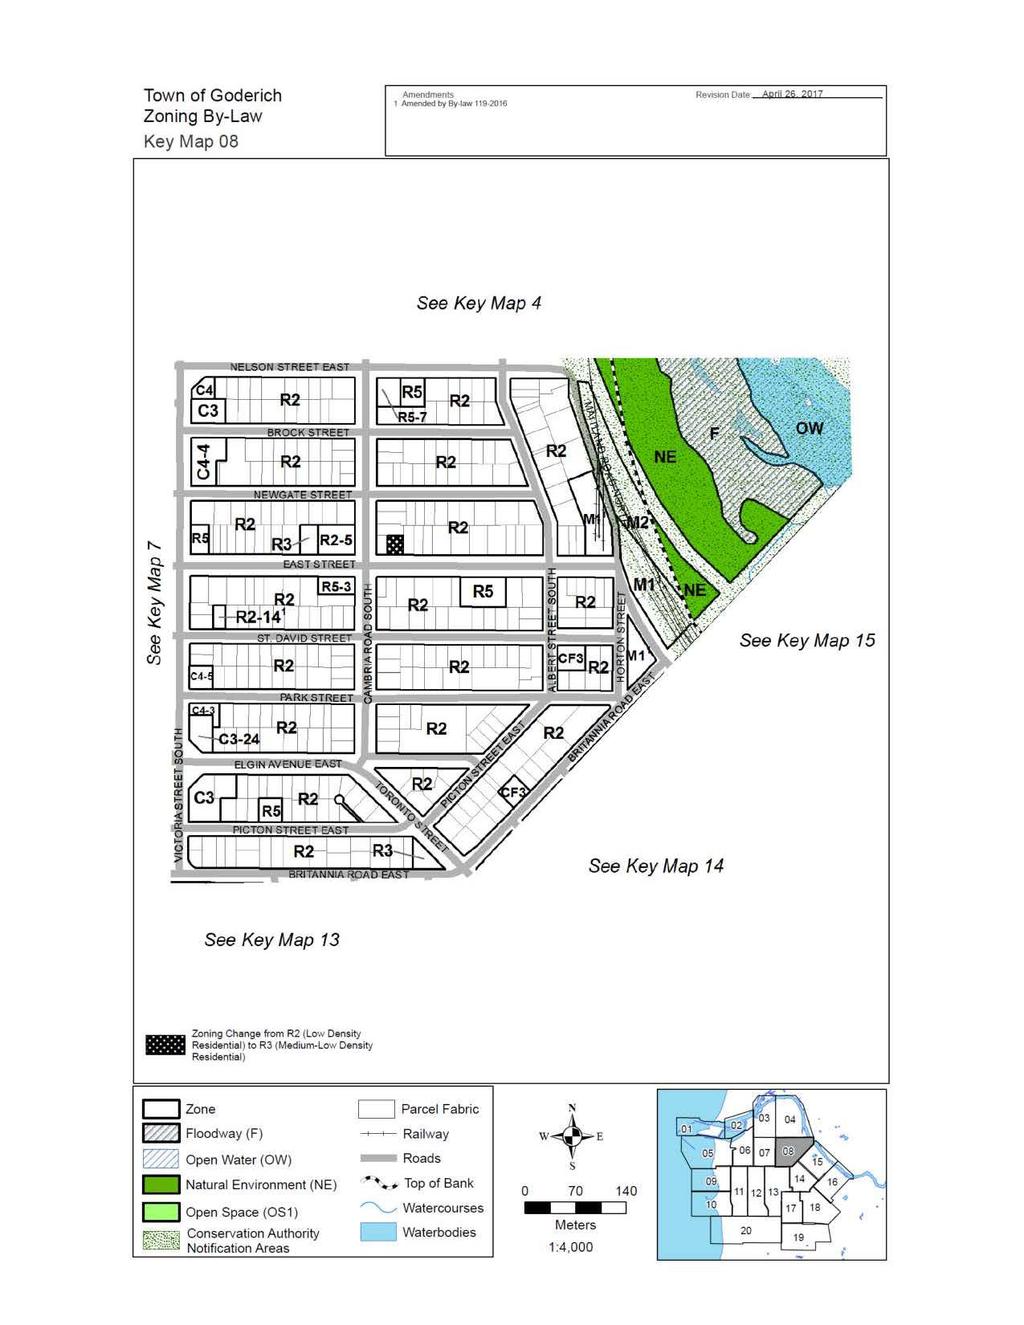 Tow n of Goderich Zoning By-Law Key Map 08 Amendments 1 Amended by By l.jw 119 2016 Schedule B ReV!